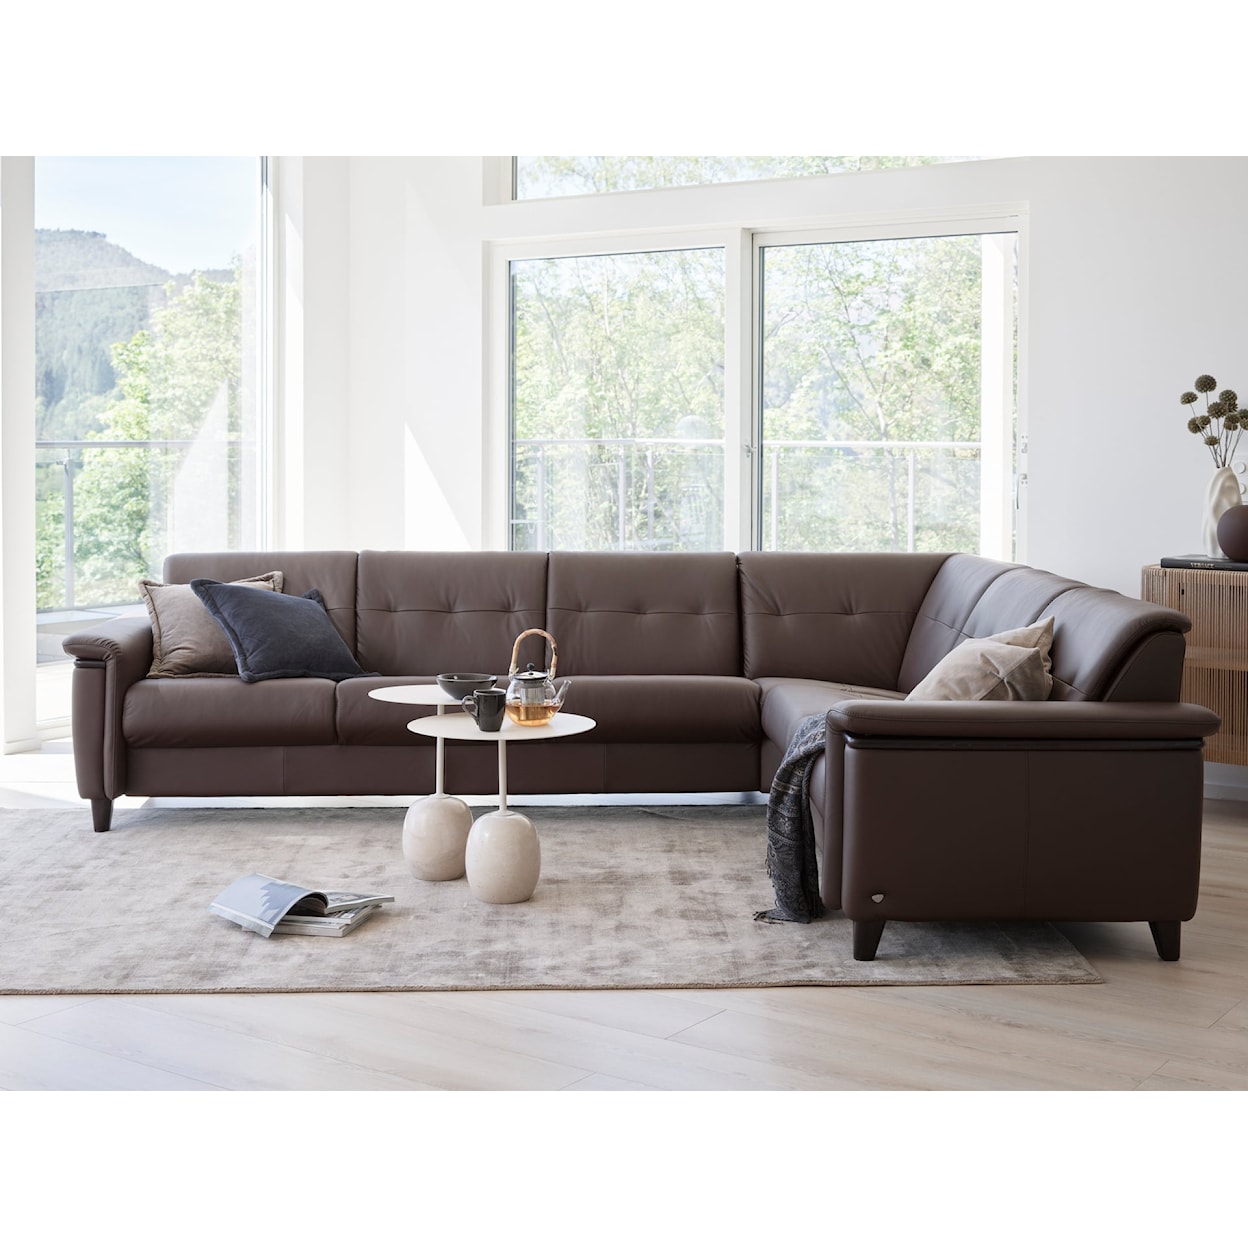 Stressless by Ekornes Flora 5-Seat Sectional